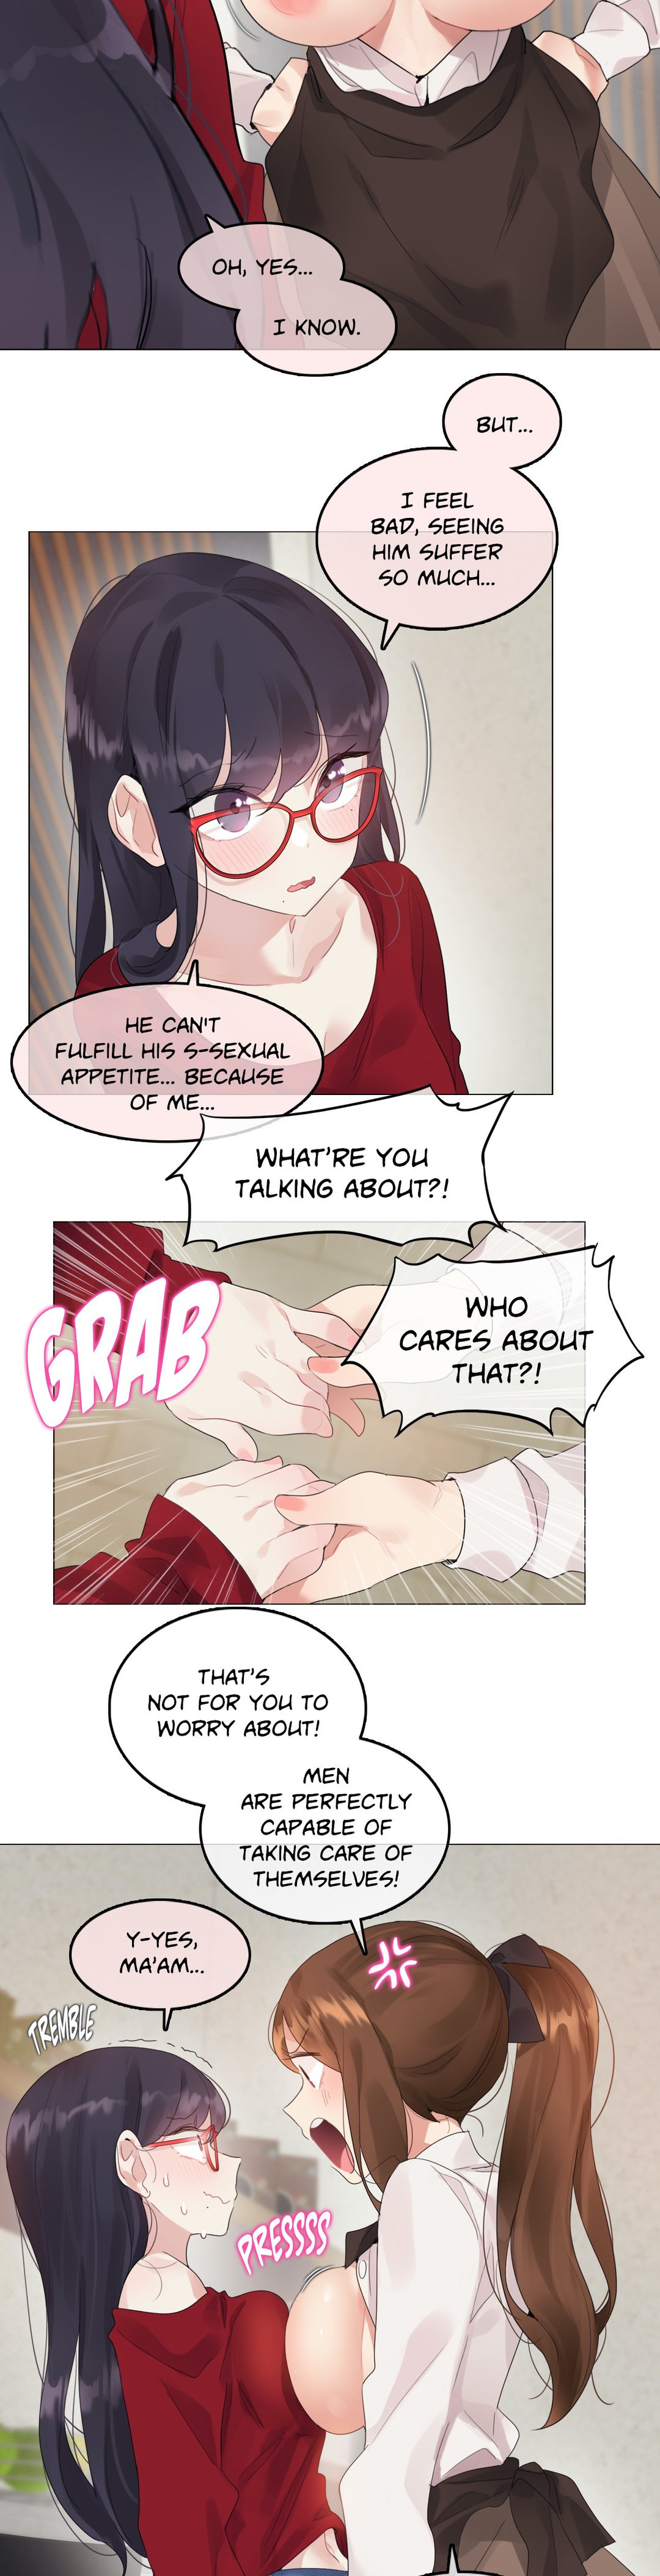 A Pervert’s Daily life - Chapter 133 Page 4